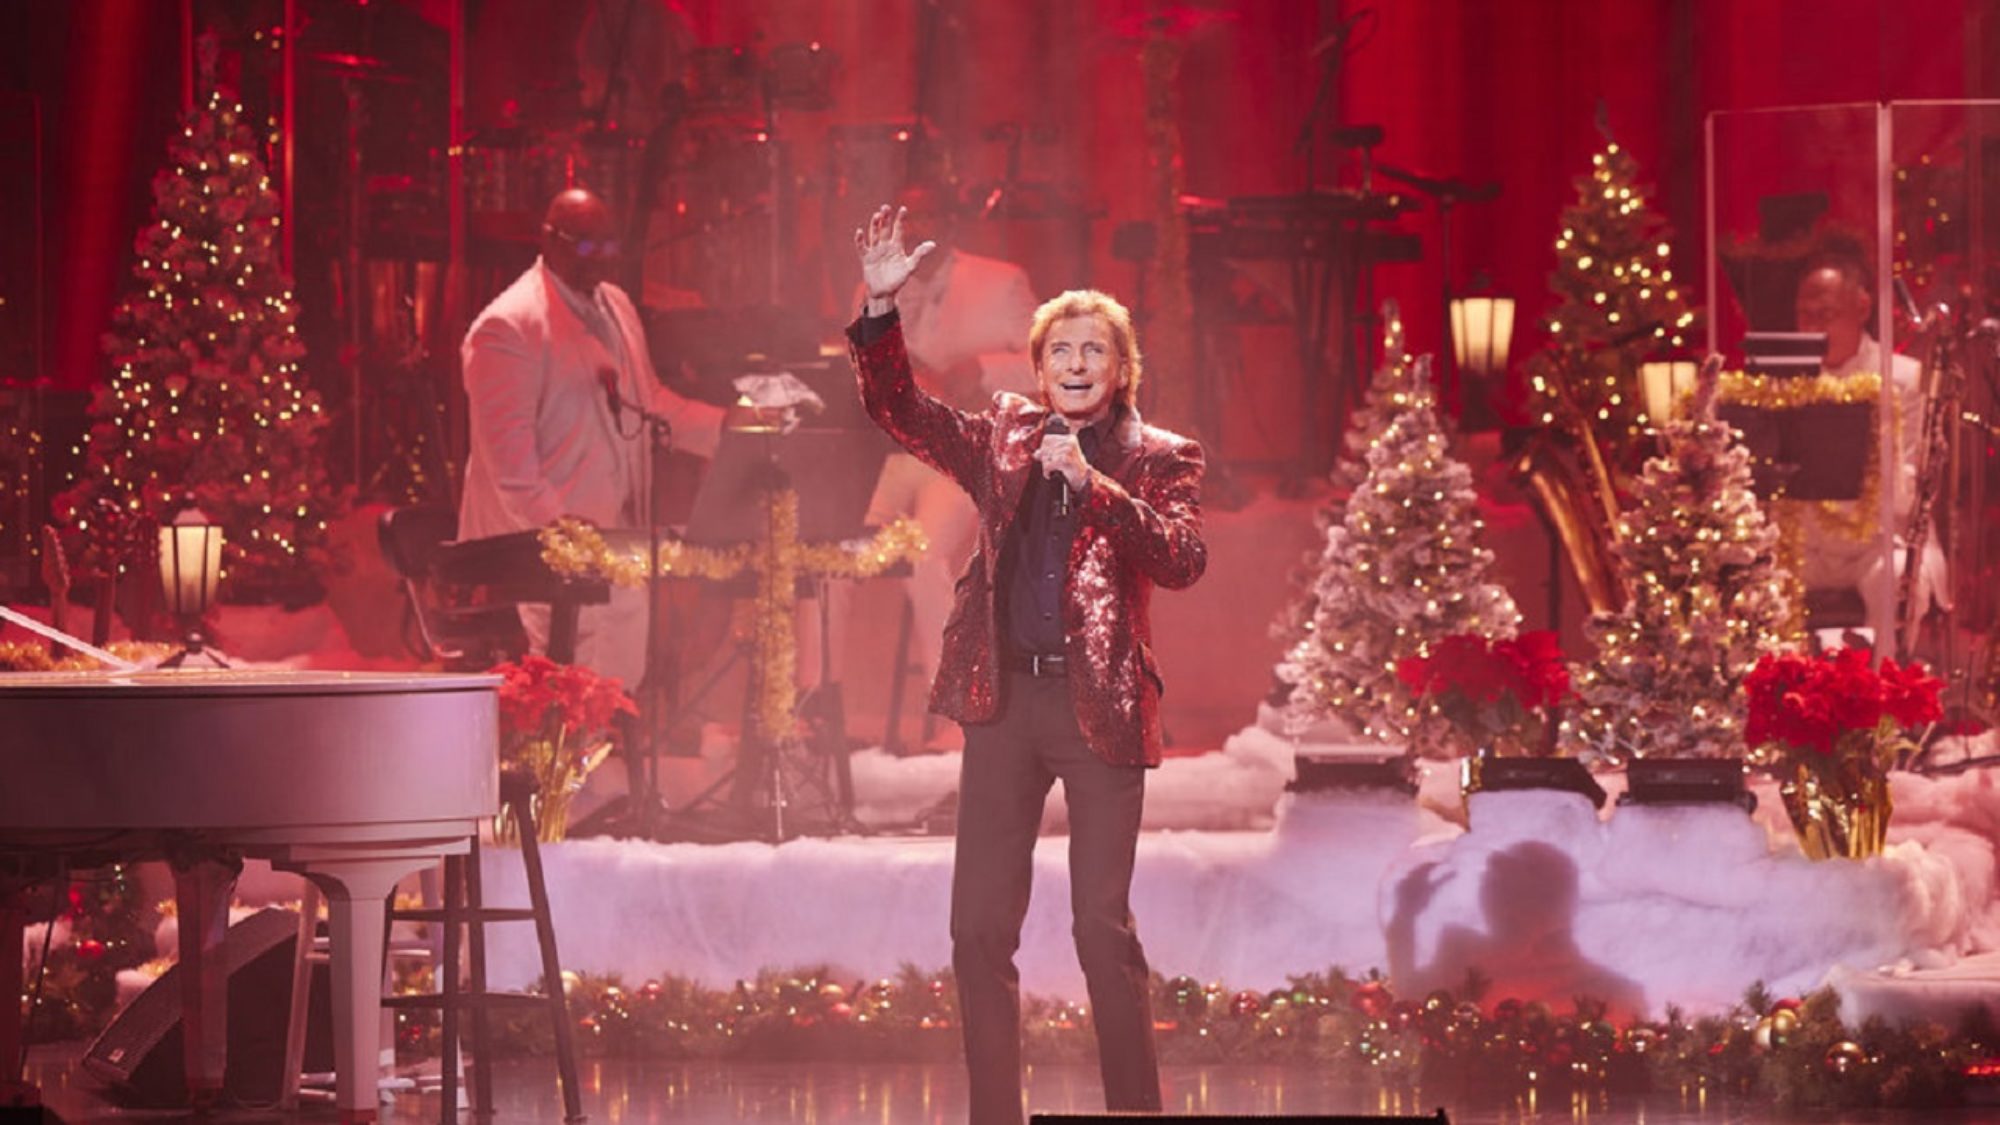 Barry Manilow on What Viewers Can Expect from NBC Holiday Special